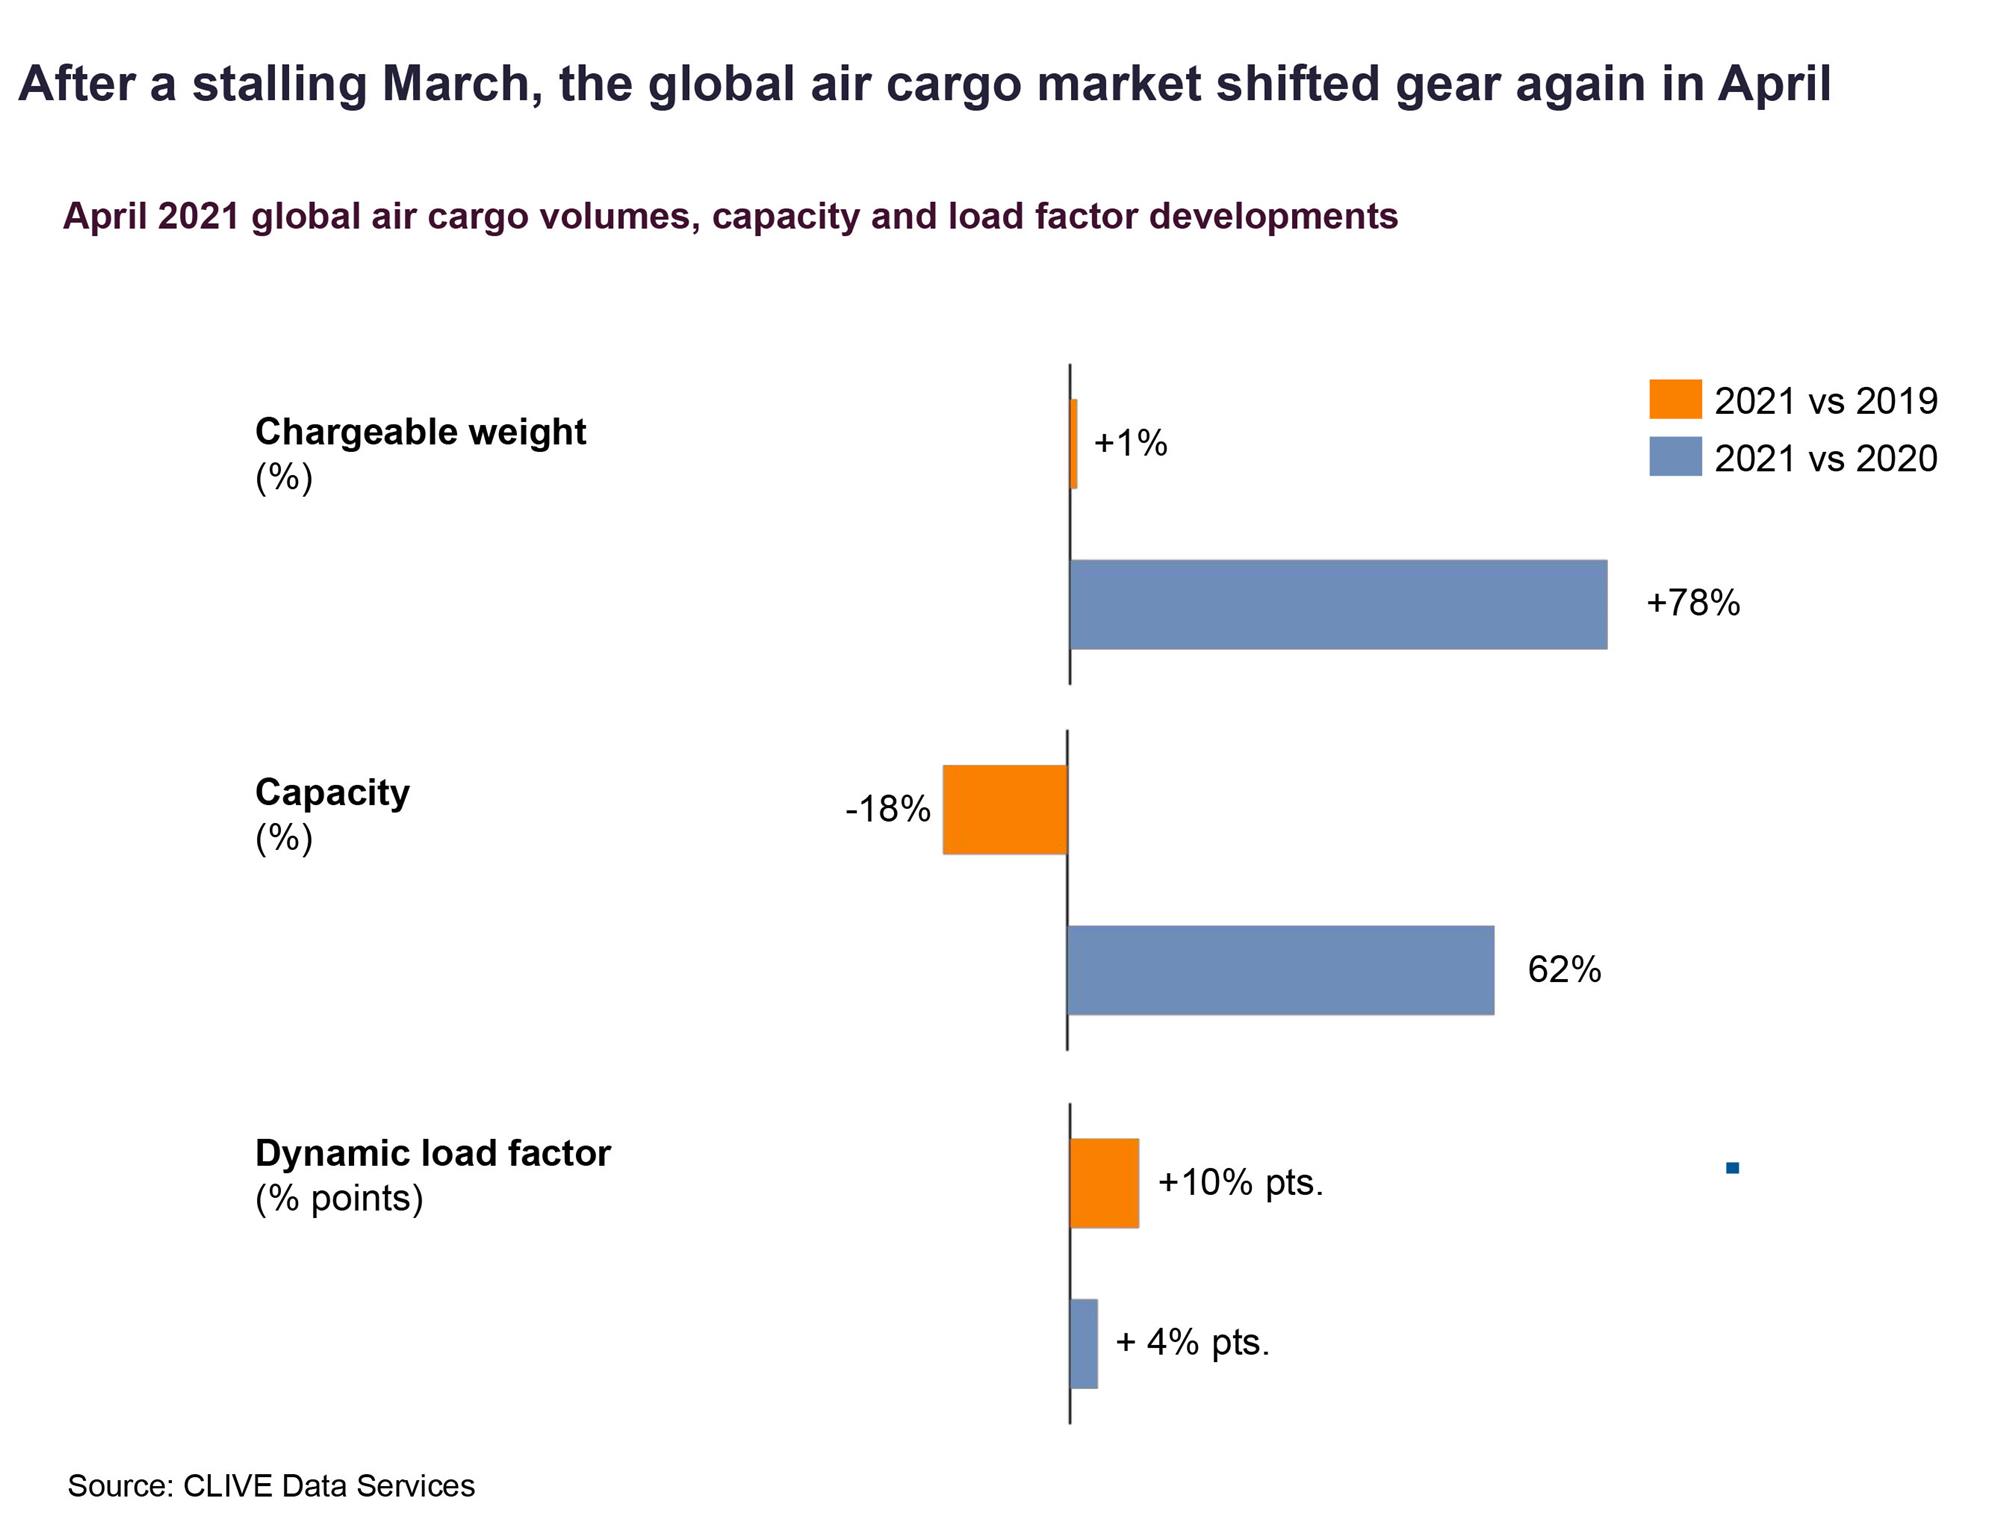 Self Photos / Files - After a stalling March, the global air cargo market shifted again in April